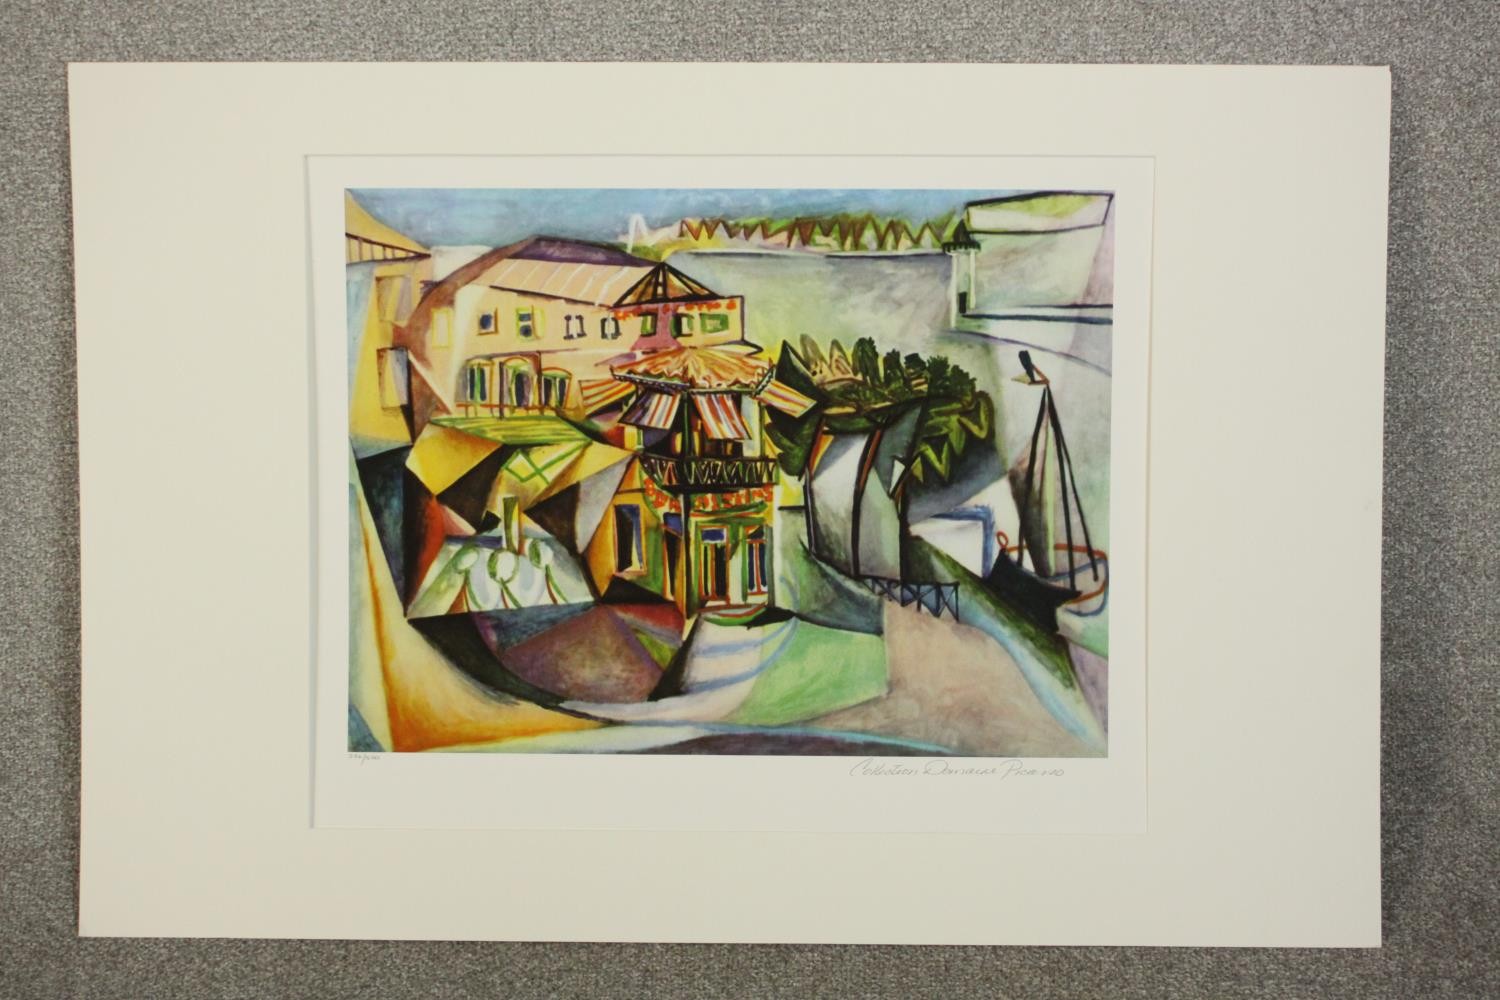 After Pablo Picasso, Cafe a Royan (Cafe in Royan), (1940), giclée print on archival paper, edition - Image 2 of 7